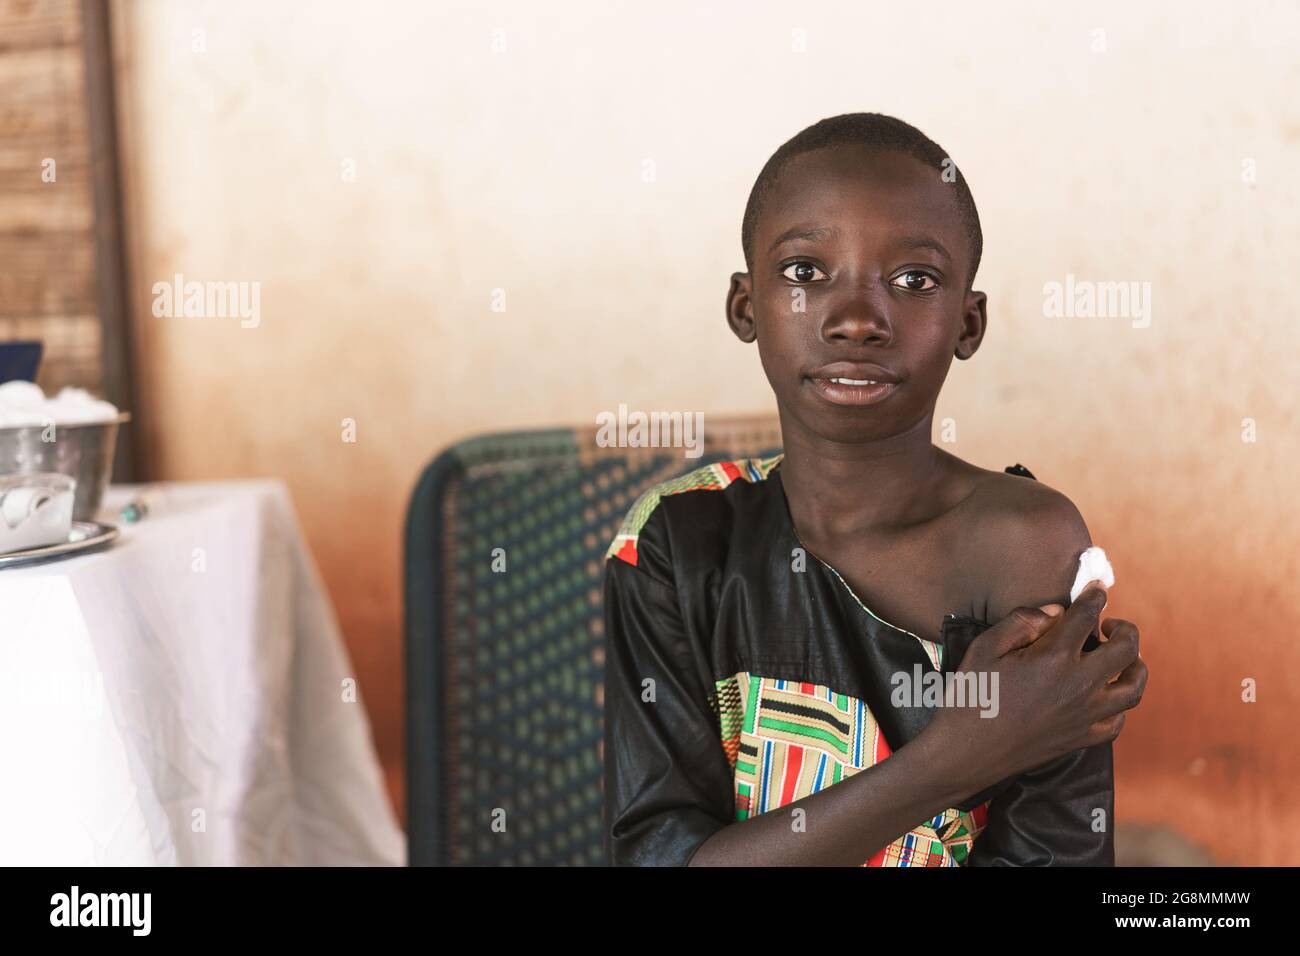 In this imagine a relieved and content looking African boys holds a cotton ball on the injection site after having receiving a routinary vaccination t Stock Photo